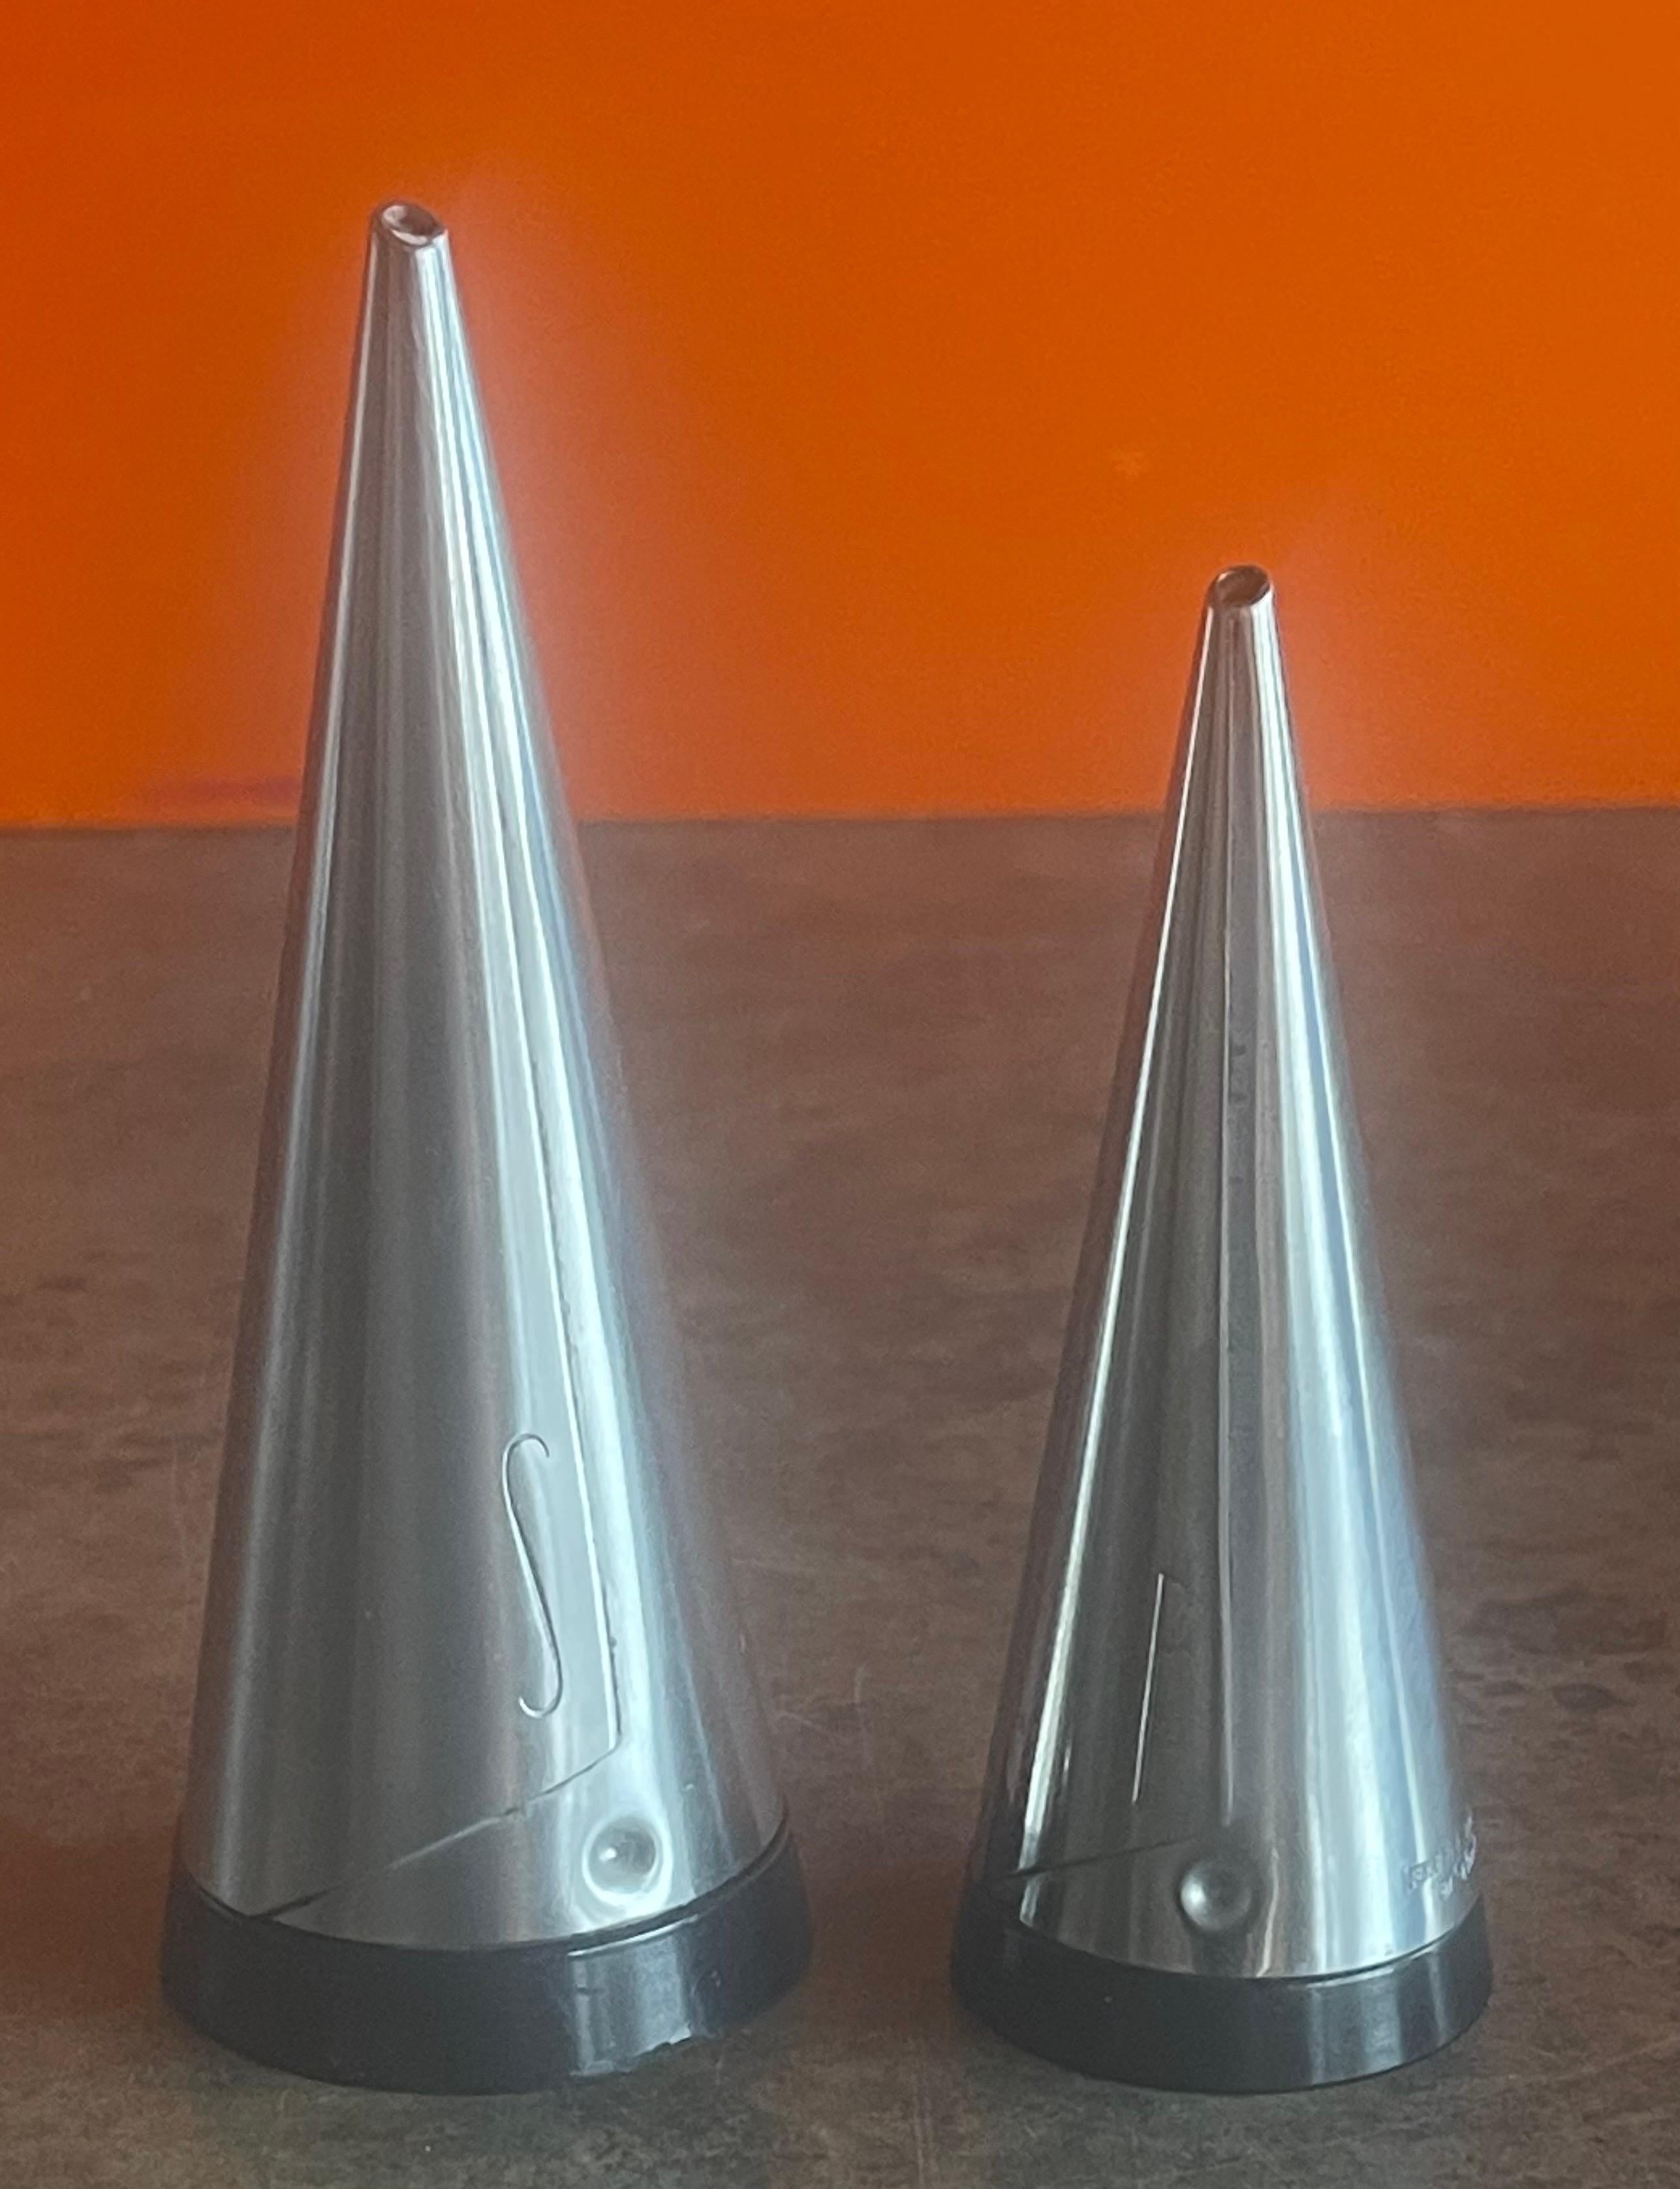 Stylish pair of vintage Scandinavian modern conical shaped salt and pepper shakers by Pierre Forssell for Gense, circa 1960s. Timeless design in stainless steel and bakelite, the salt shaker is engraved with an 'S' and the pepper shaker with a 'P'.